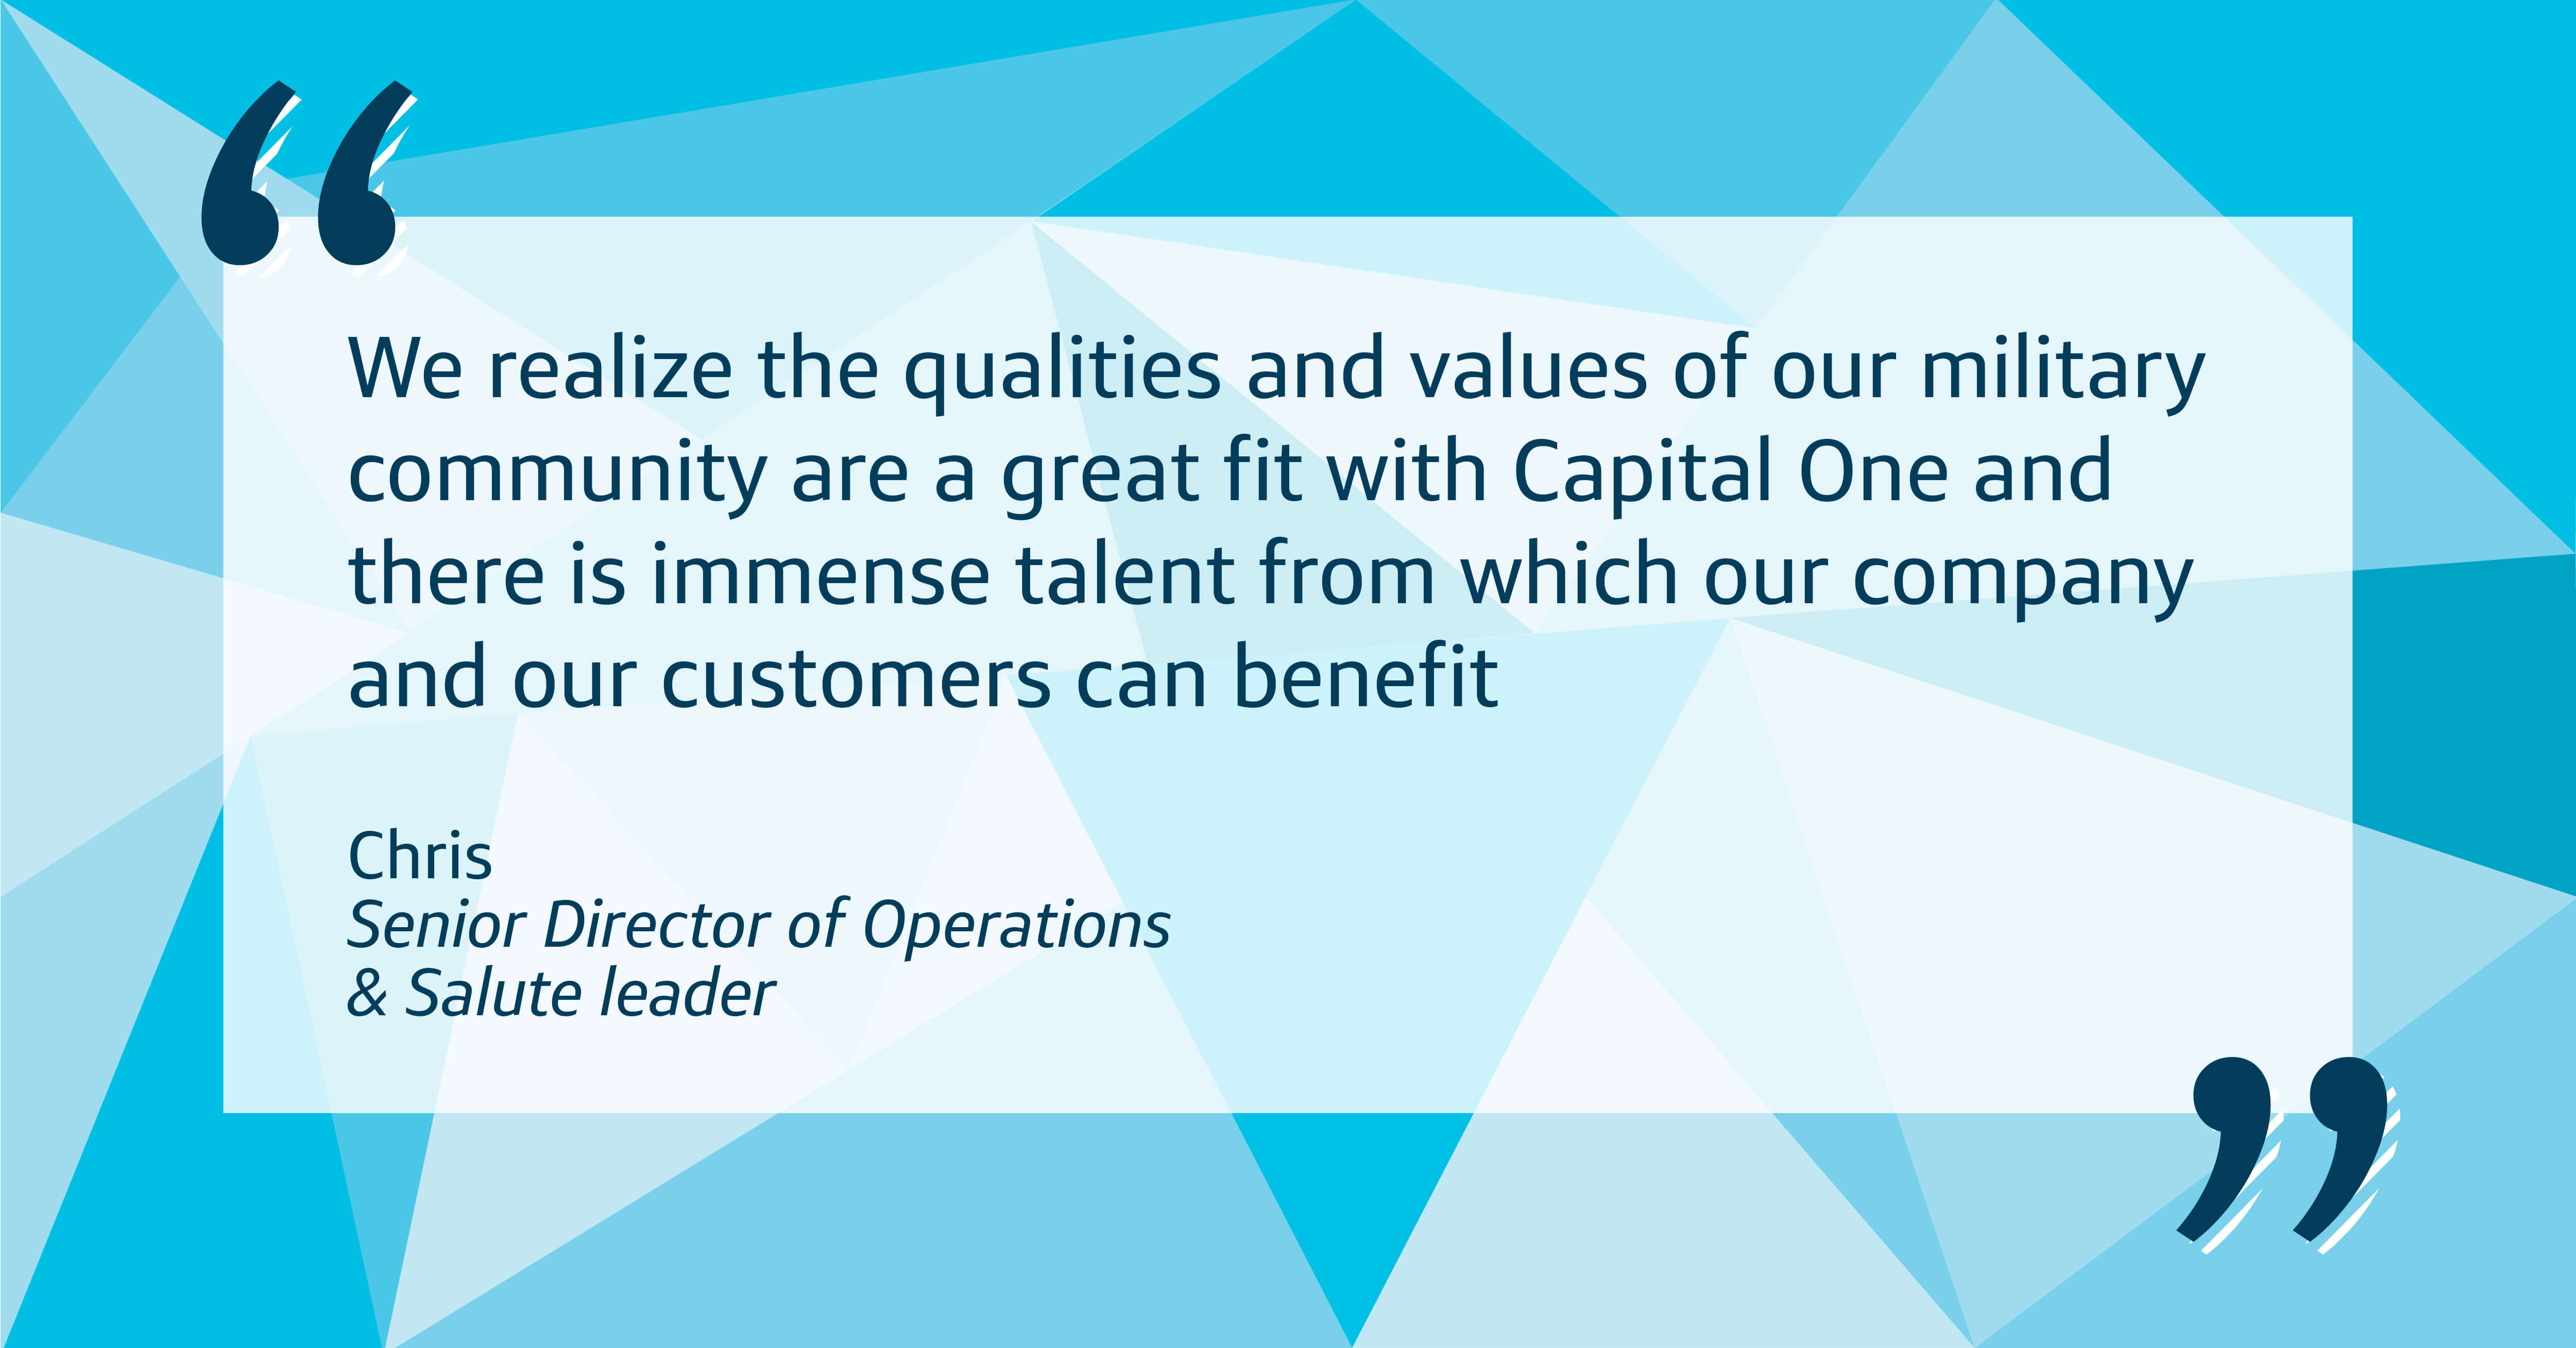 "We realize the qualities and values of our military community are a great fit with Capital One and there is immense talent from which our company and our customers can benefit."